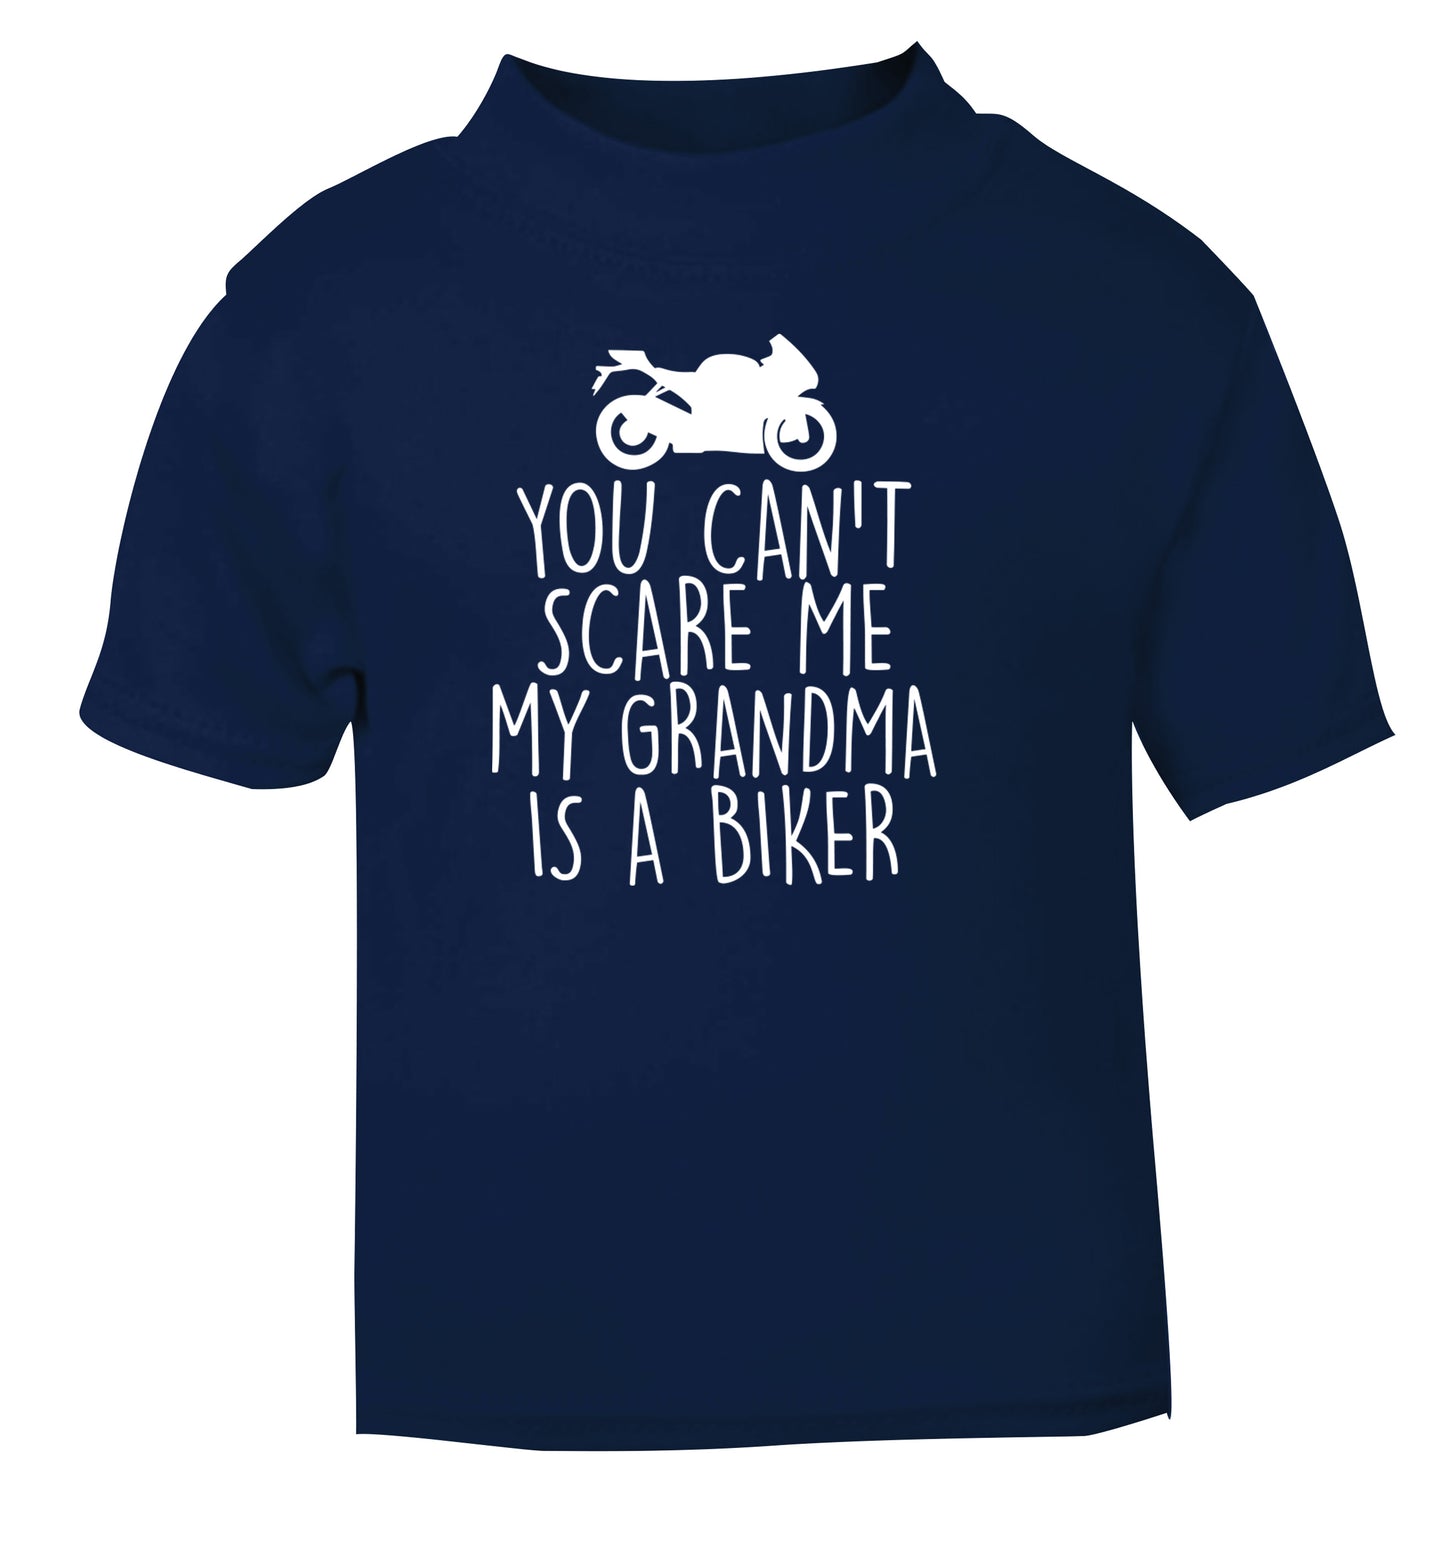 You can't scare me my grandma is a biker navy Baby Toddler Tshirt 2 Years